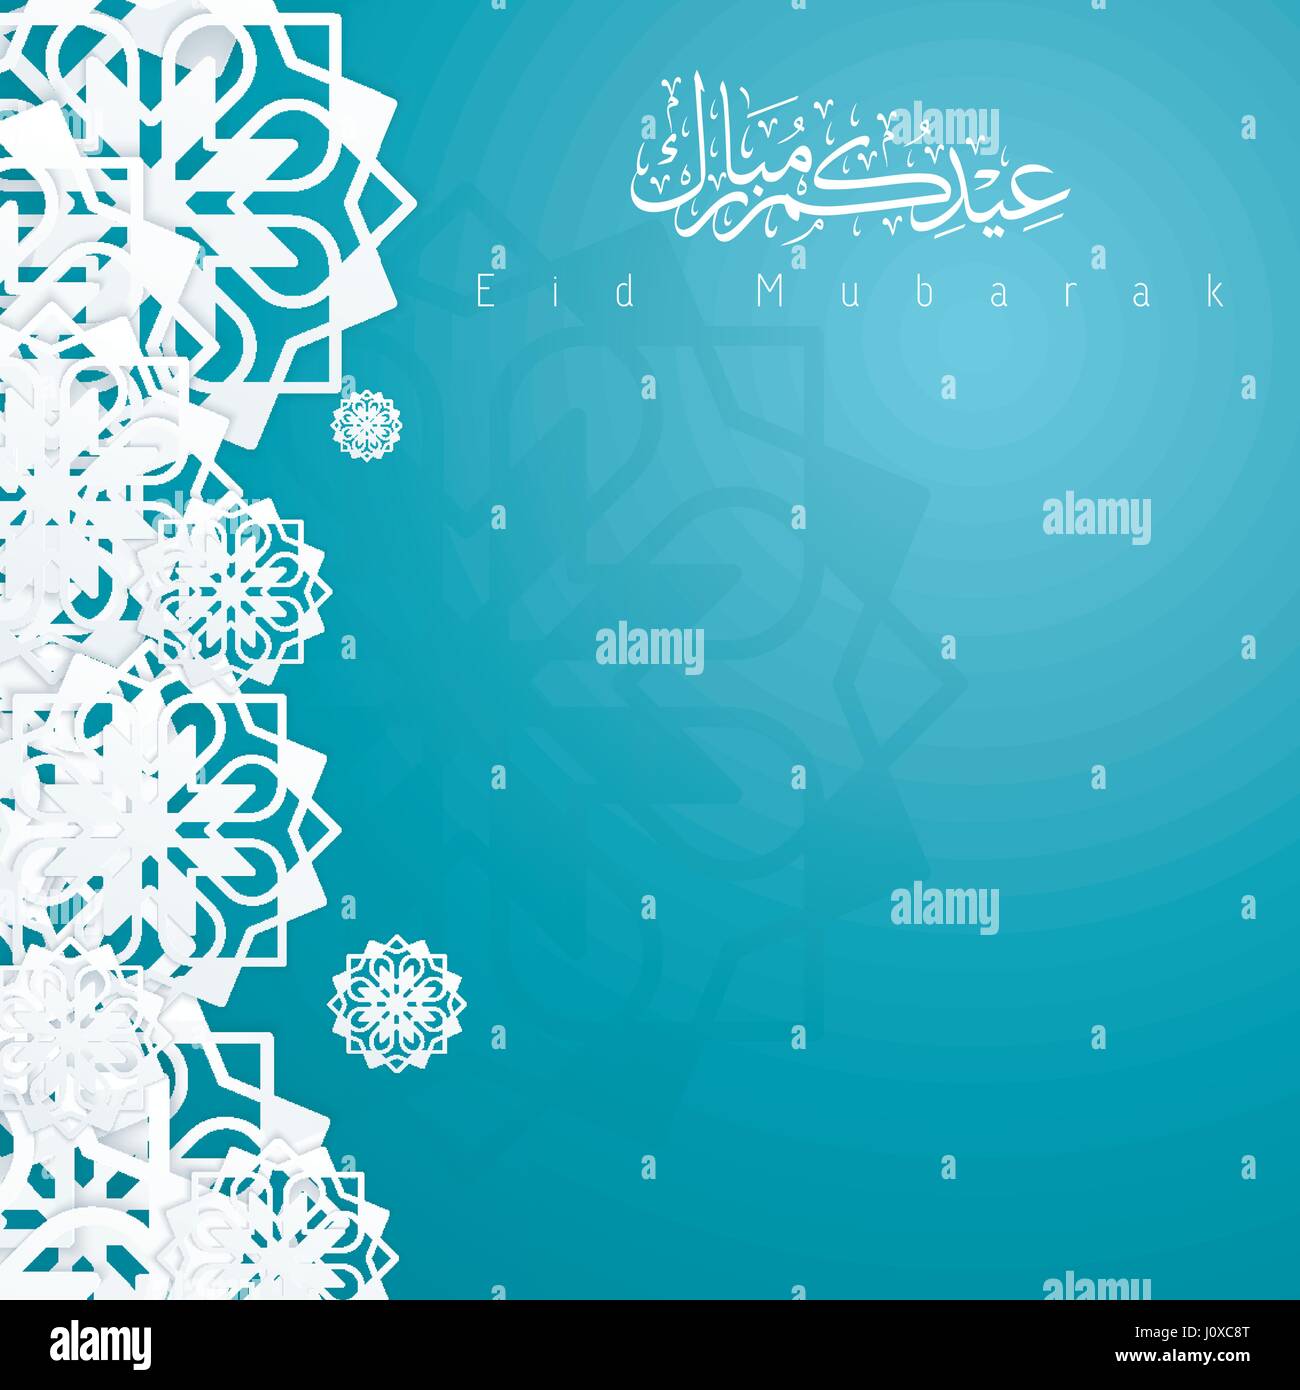 Eid Mubarak background design with arabic text and geometric pattern for greeting card celebration Stock Vector